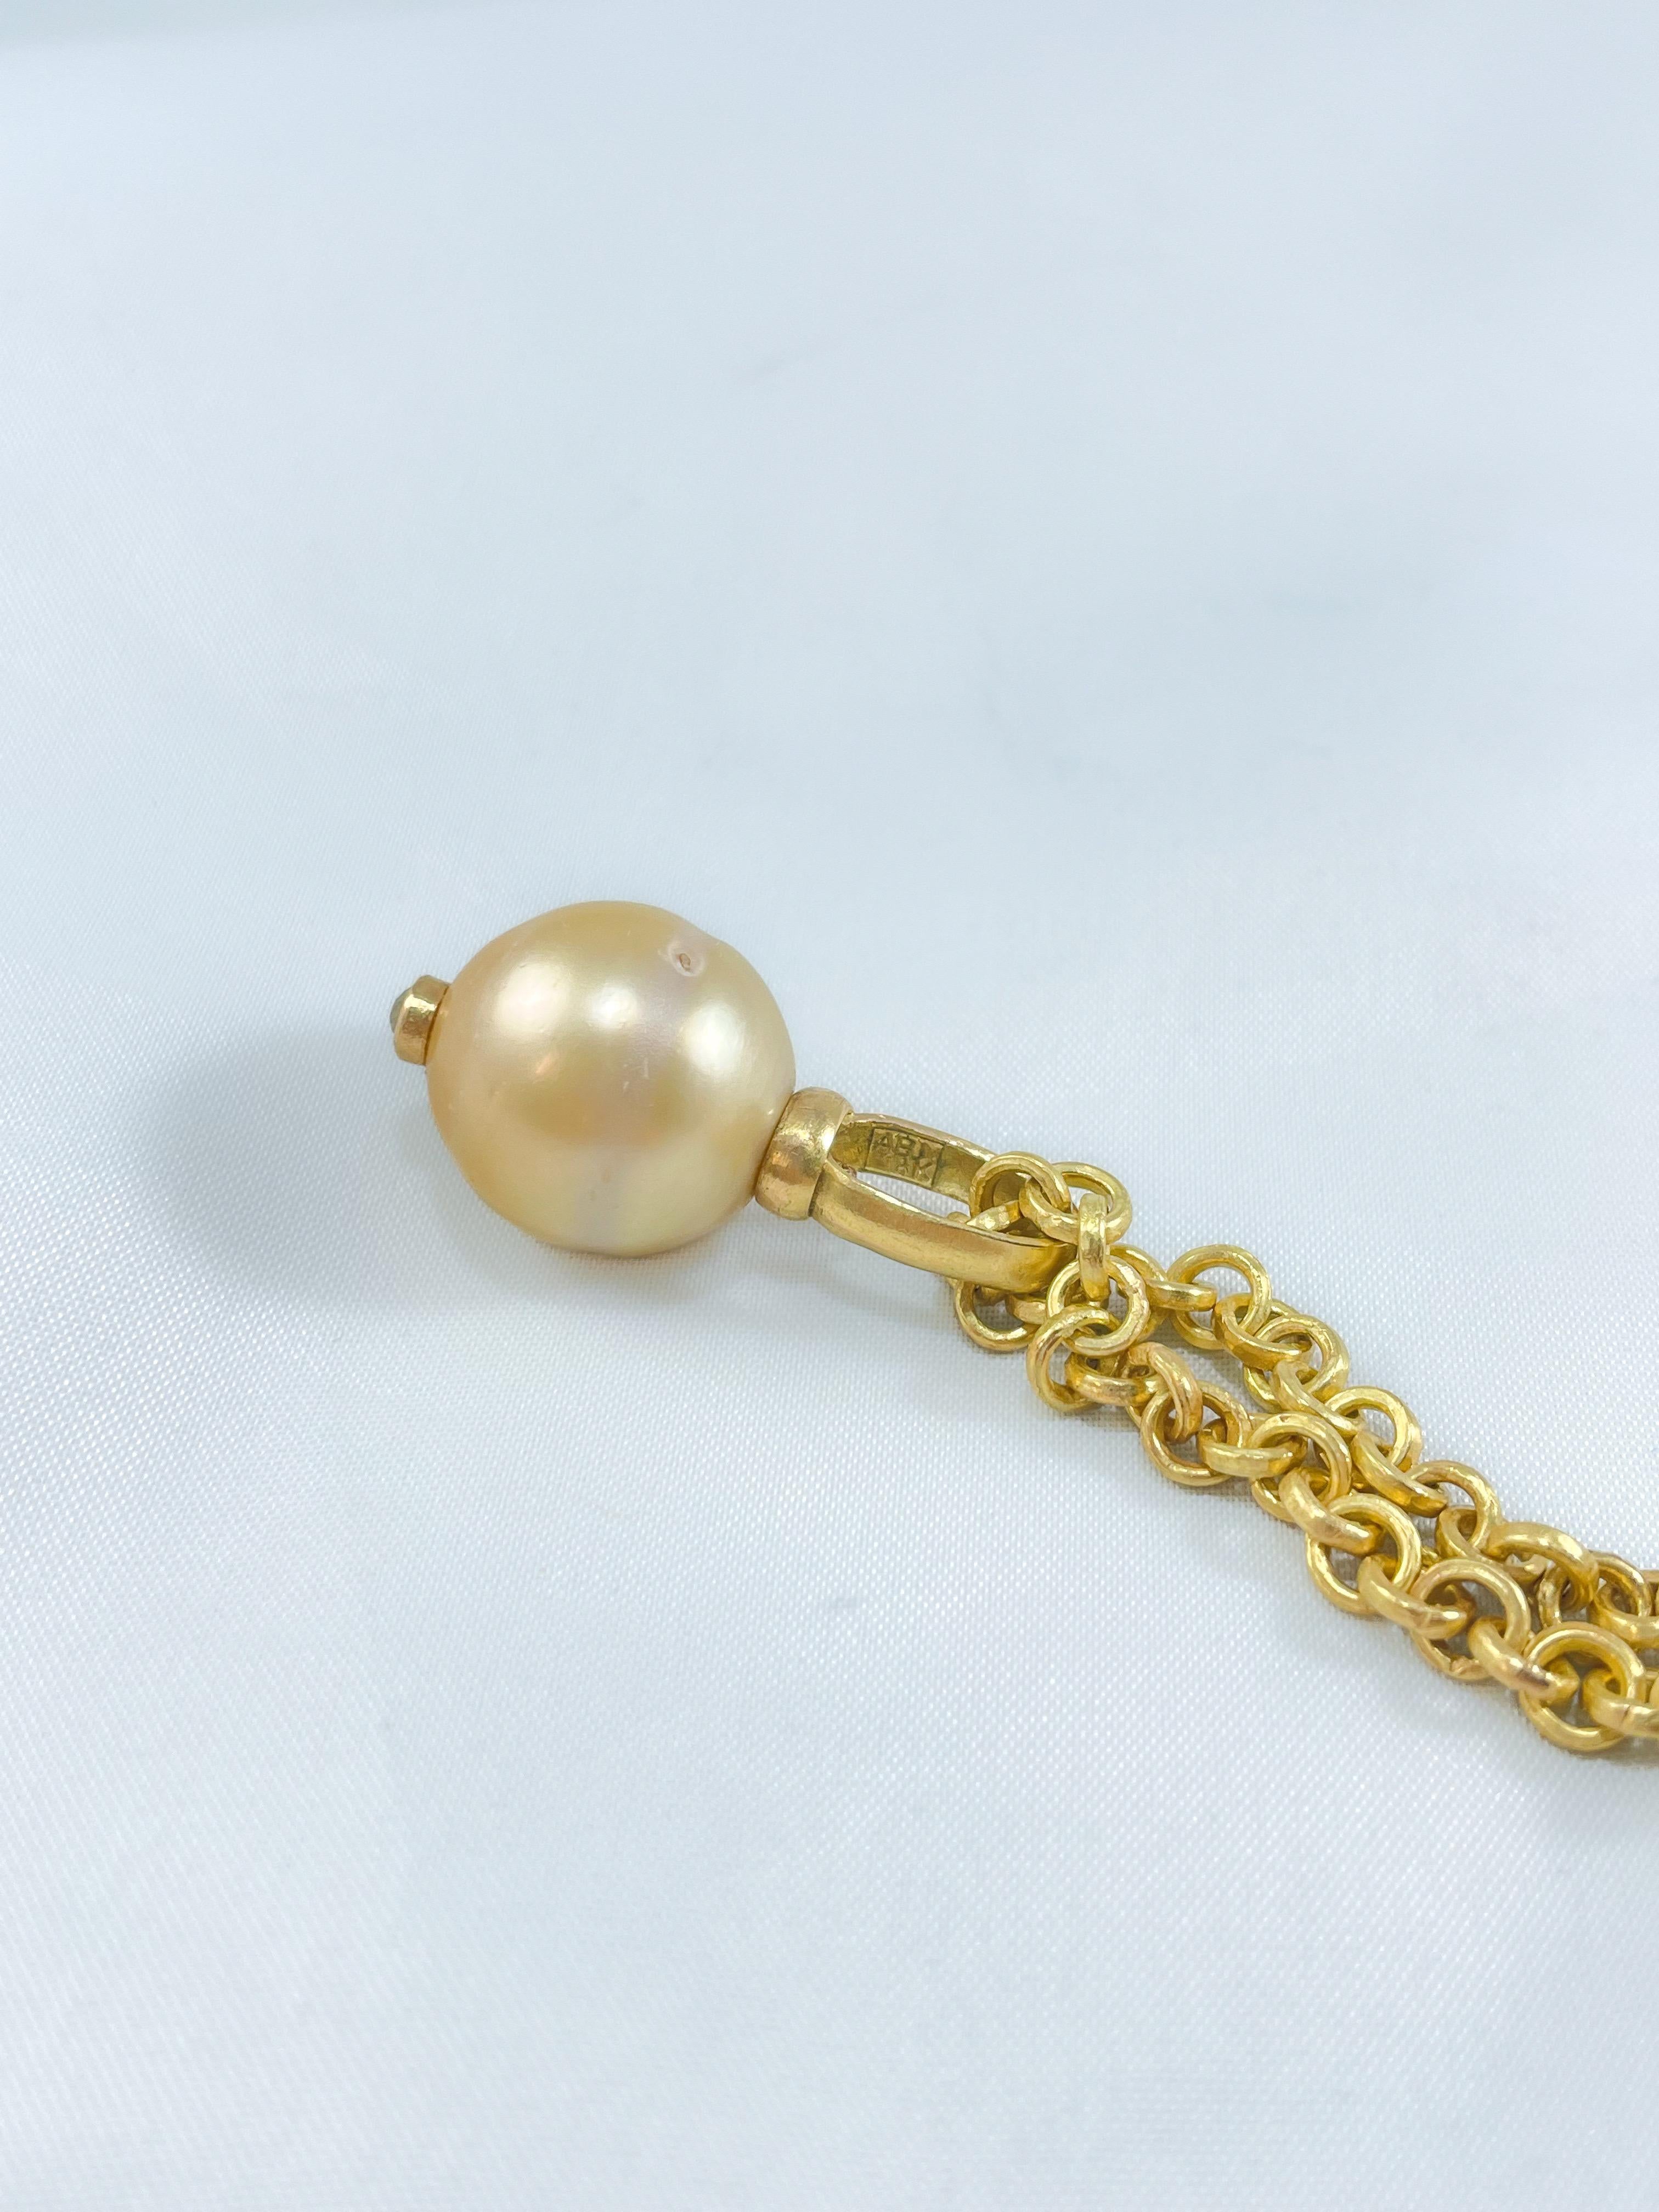 17mm Cream Pearl on 18K Gold Chain Necklace Diamond Enhancer and Toggle Clasp For Sale 8